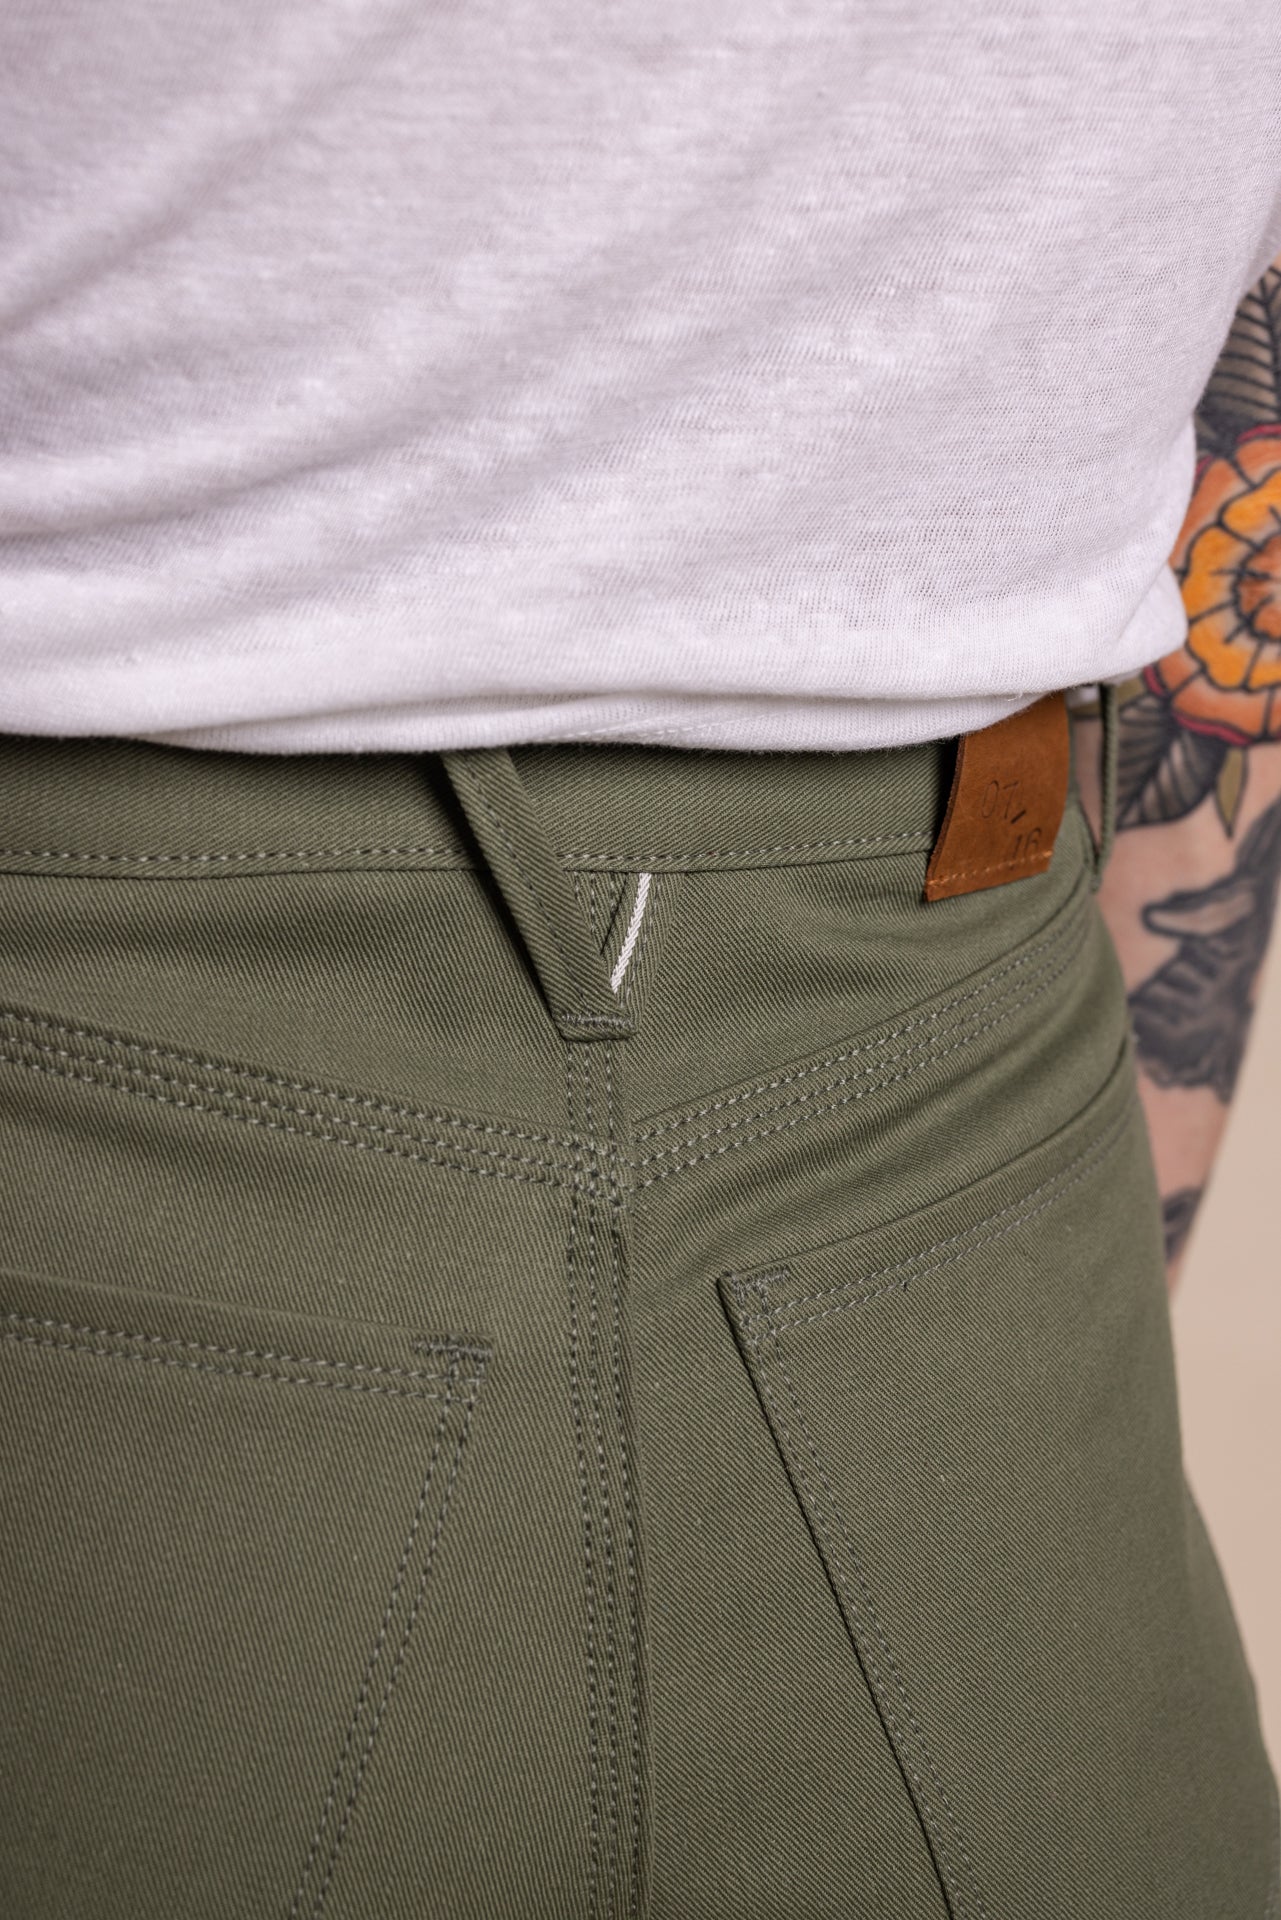 angle: Caper Army Selvage